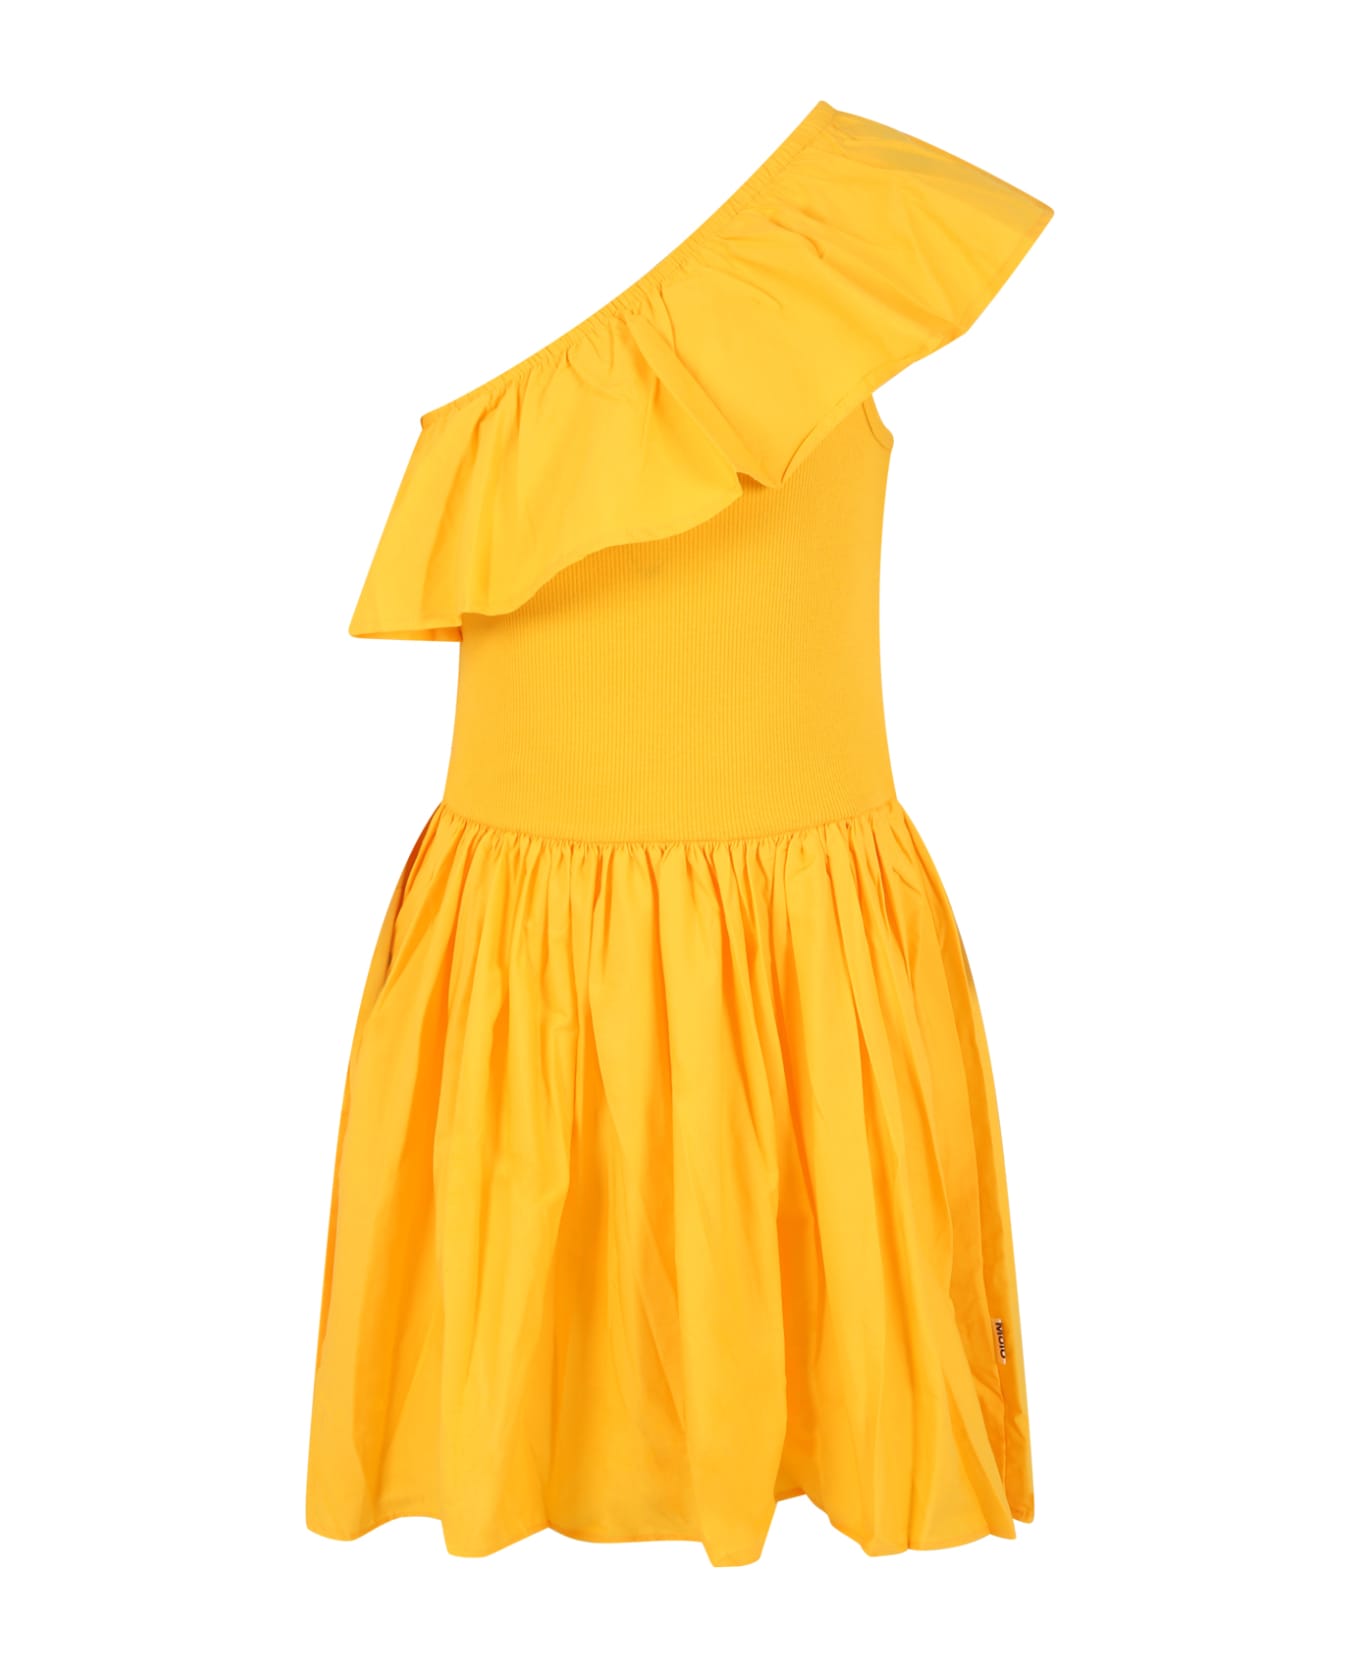 Molo Yellow Dress For Girl With Ruffles - Yellow